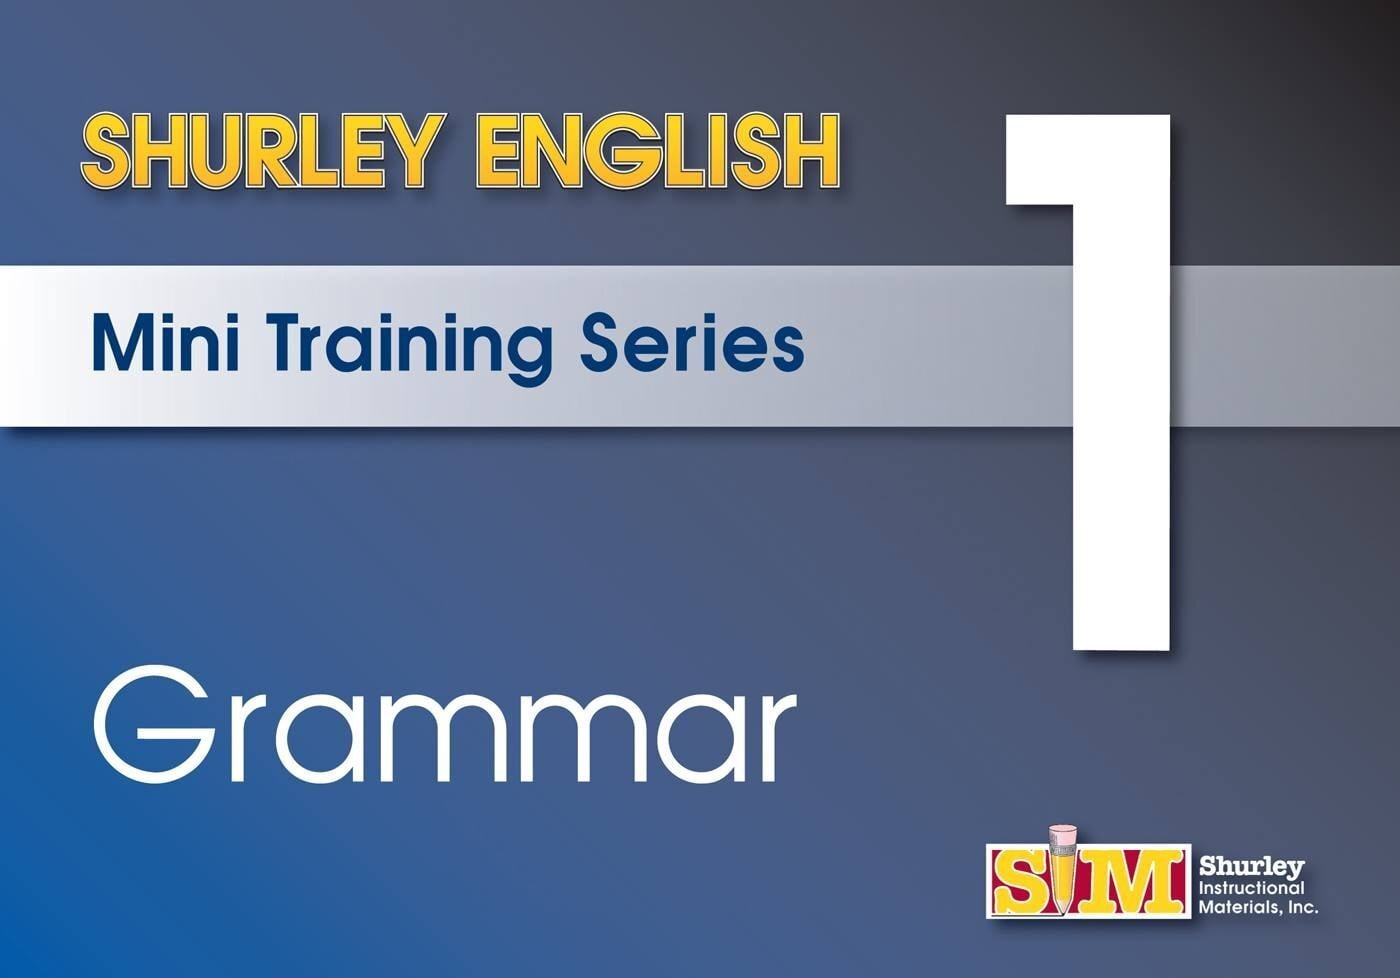 🎉 Today is the day! Don't forget to register for this FREE event.
✅ Mini Training Series Part 1: GRAMMAR
⏰ 05/16/23 @ 12:00 p.m. CDT
🎟️ https://register.gotowebinar.com/register/1691126280236045143